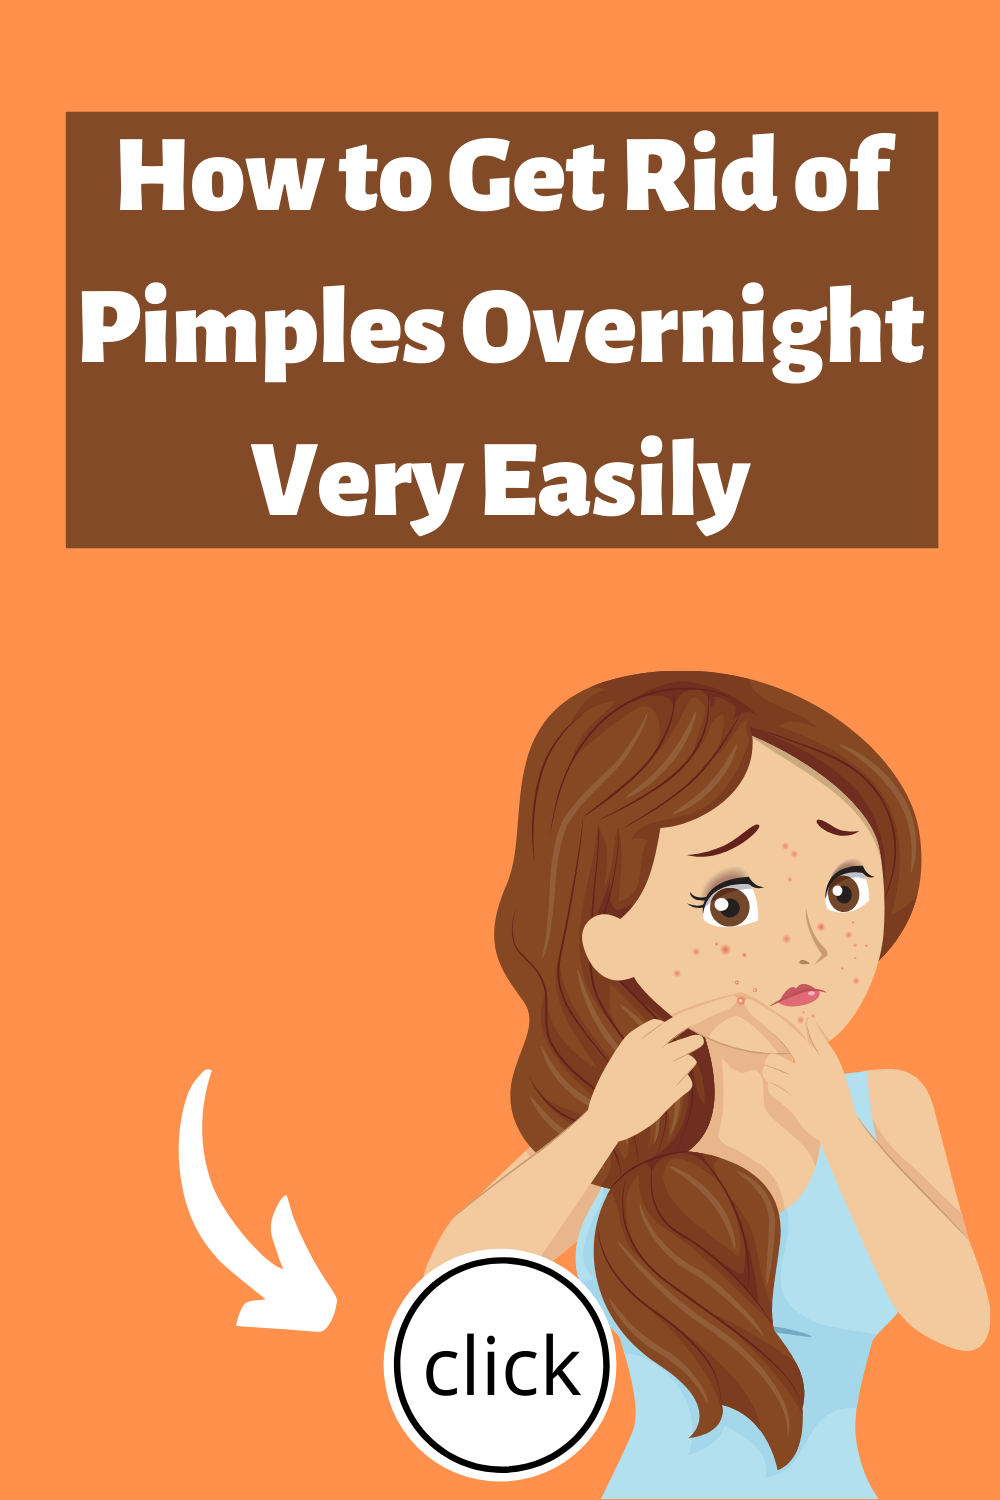 How to Get Rid of Pimples Overnight by Applying Simple Remedies -   19 how to get rid of pimples ideas